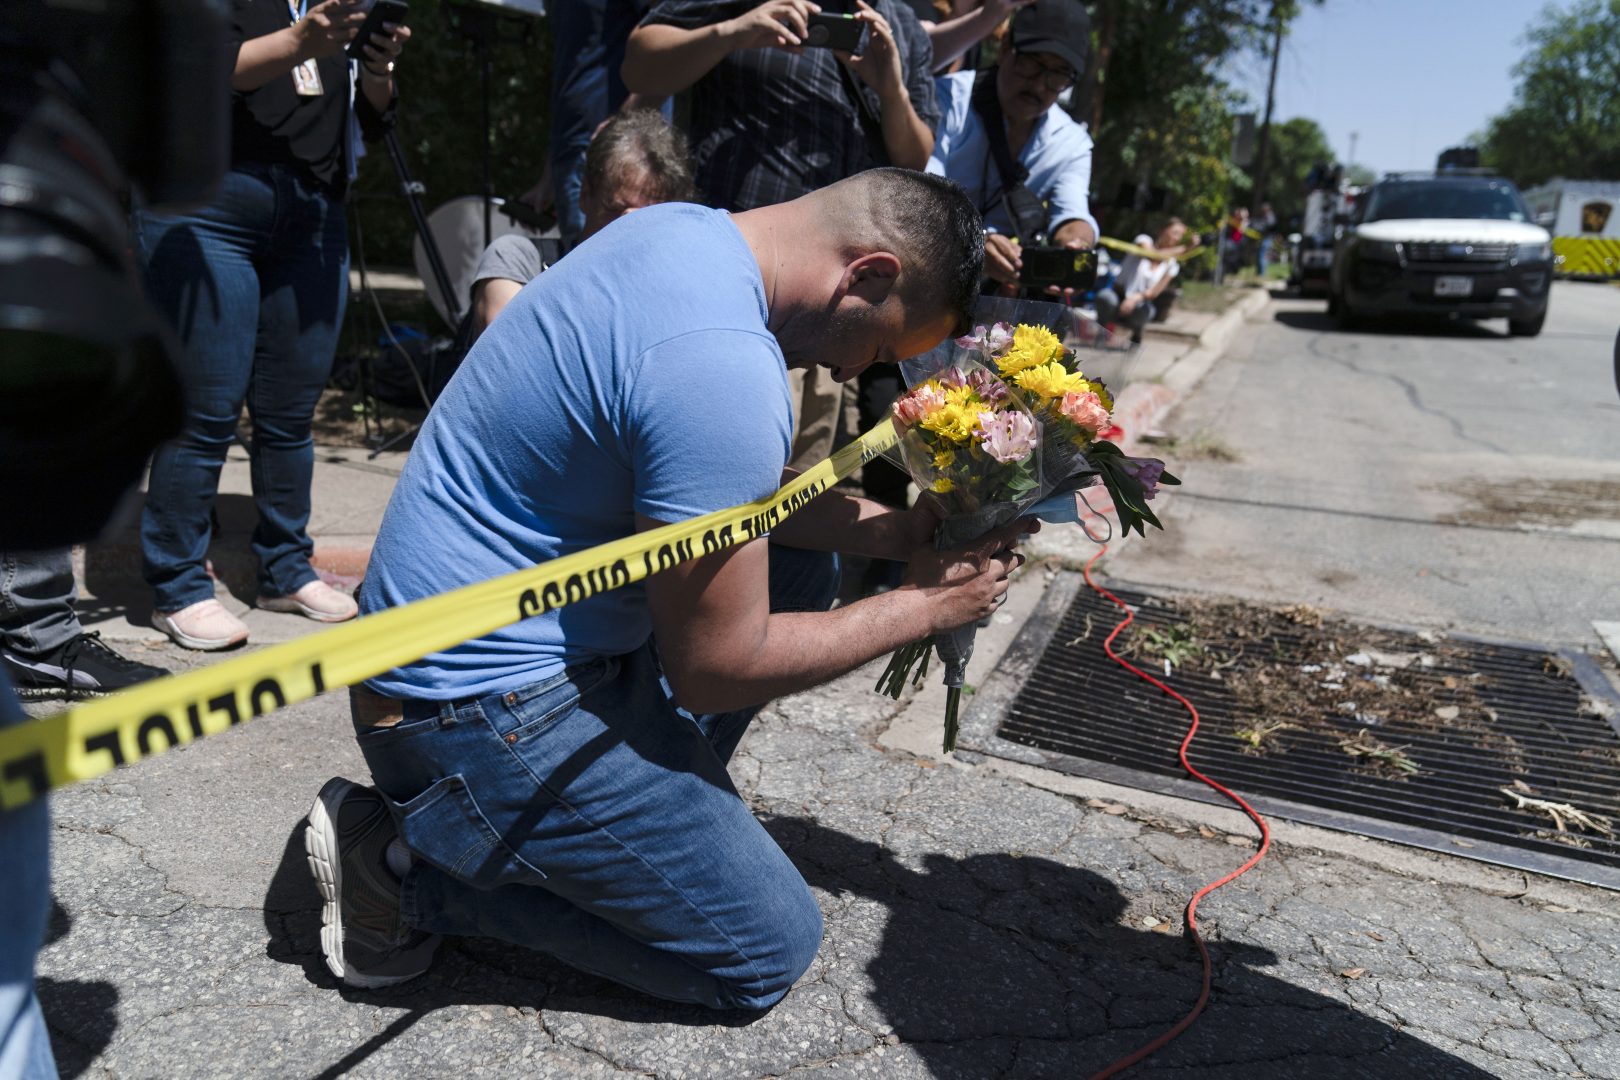 Joseph Avila, left, prays while holding flowers honoring the victims killed in Tuesday's shooting at Robb Elementary School in Uvalde, Texas, Wednesday, May 25, 2022.  